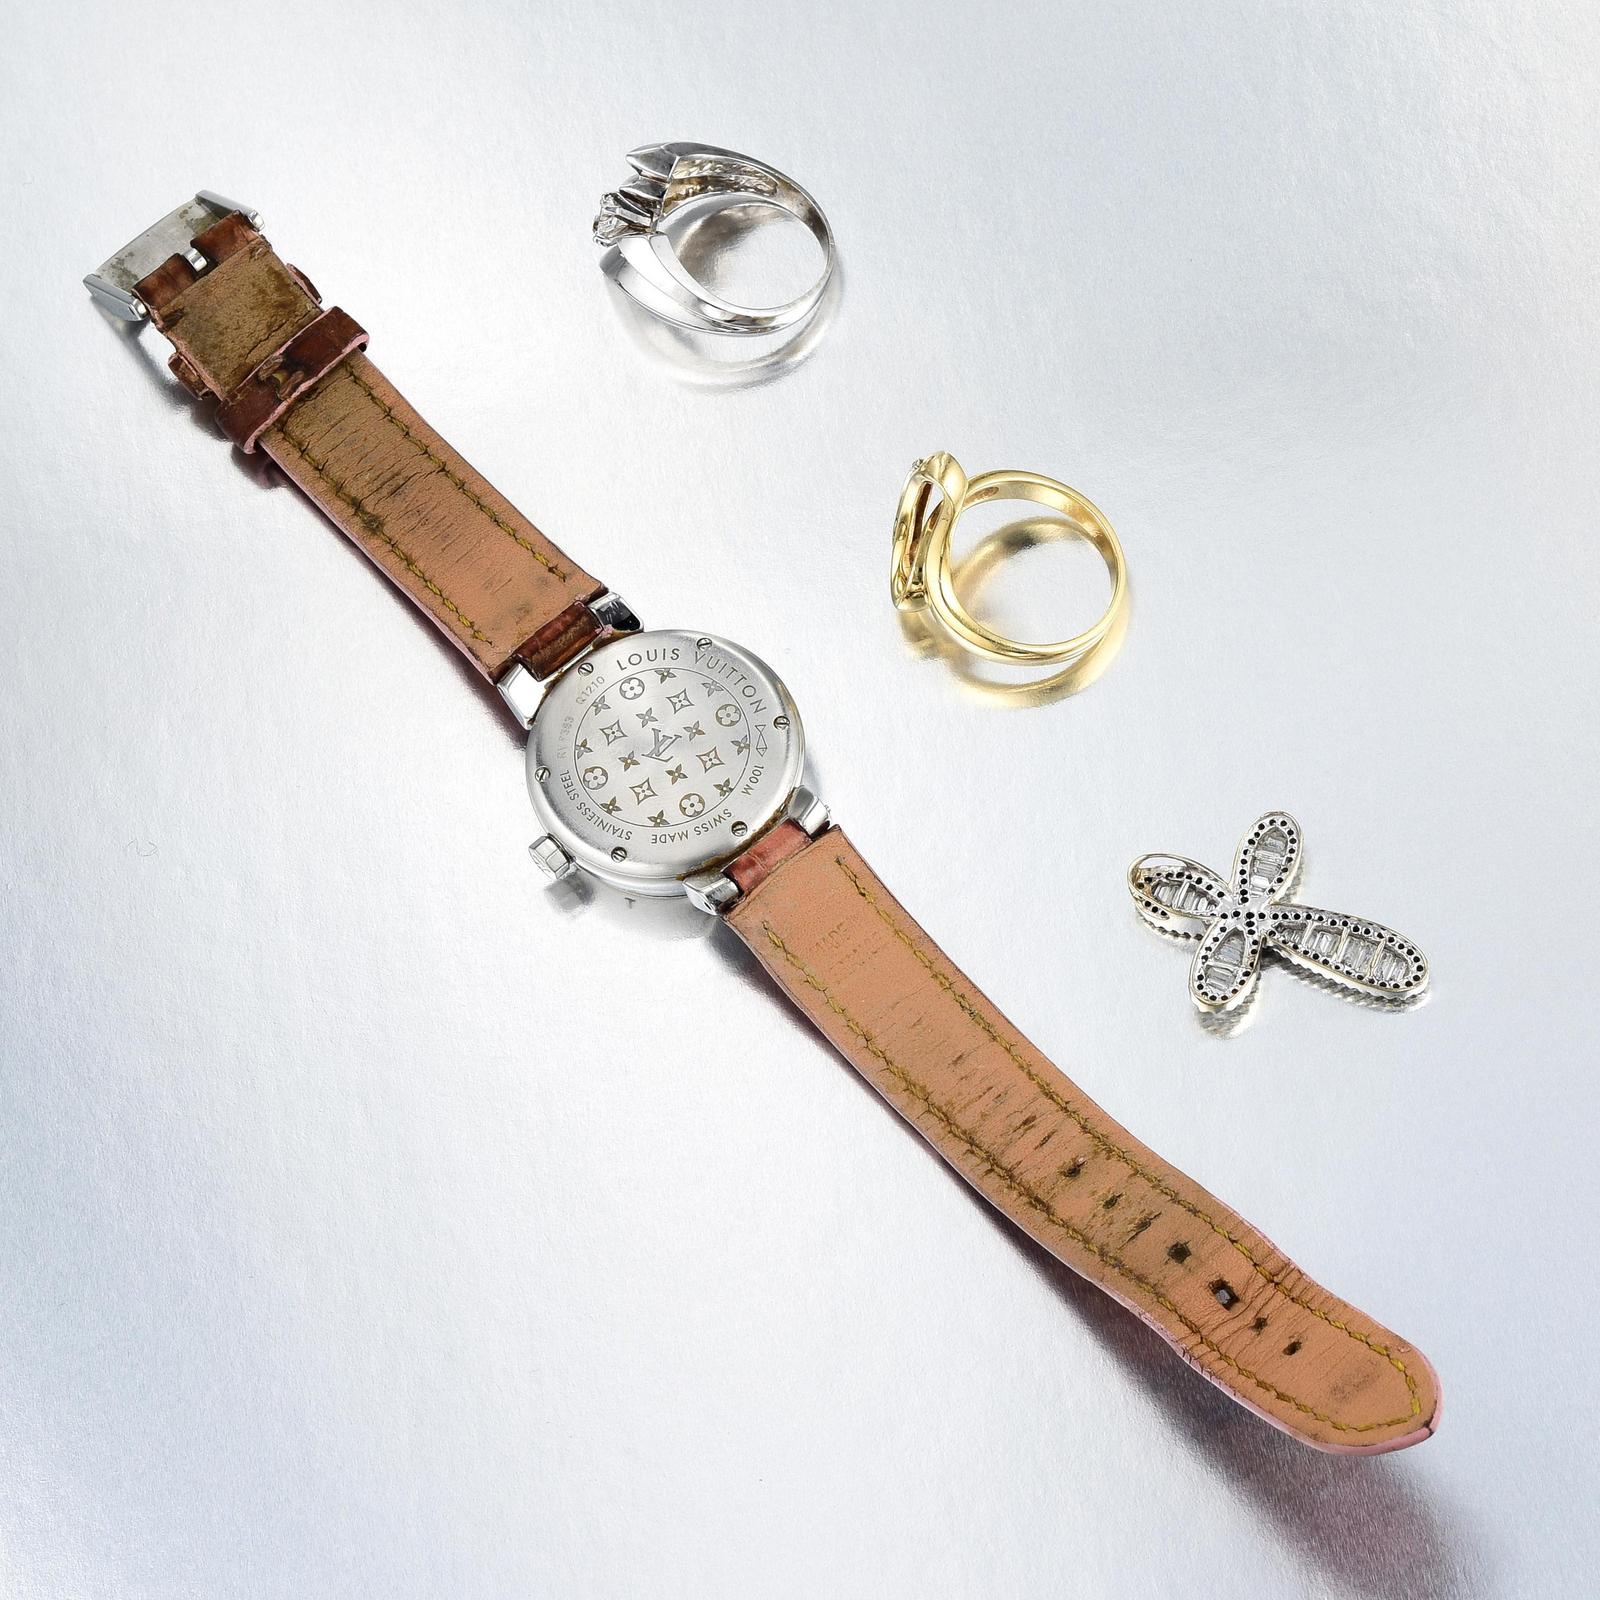 fine jewelry gold louis vuitton watches for women